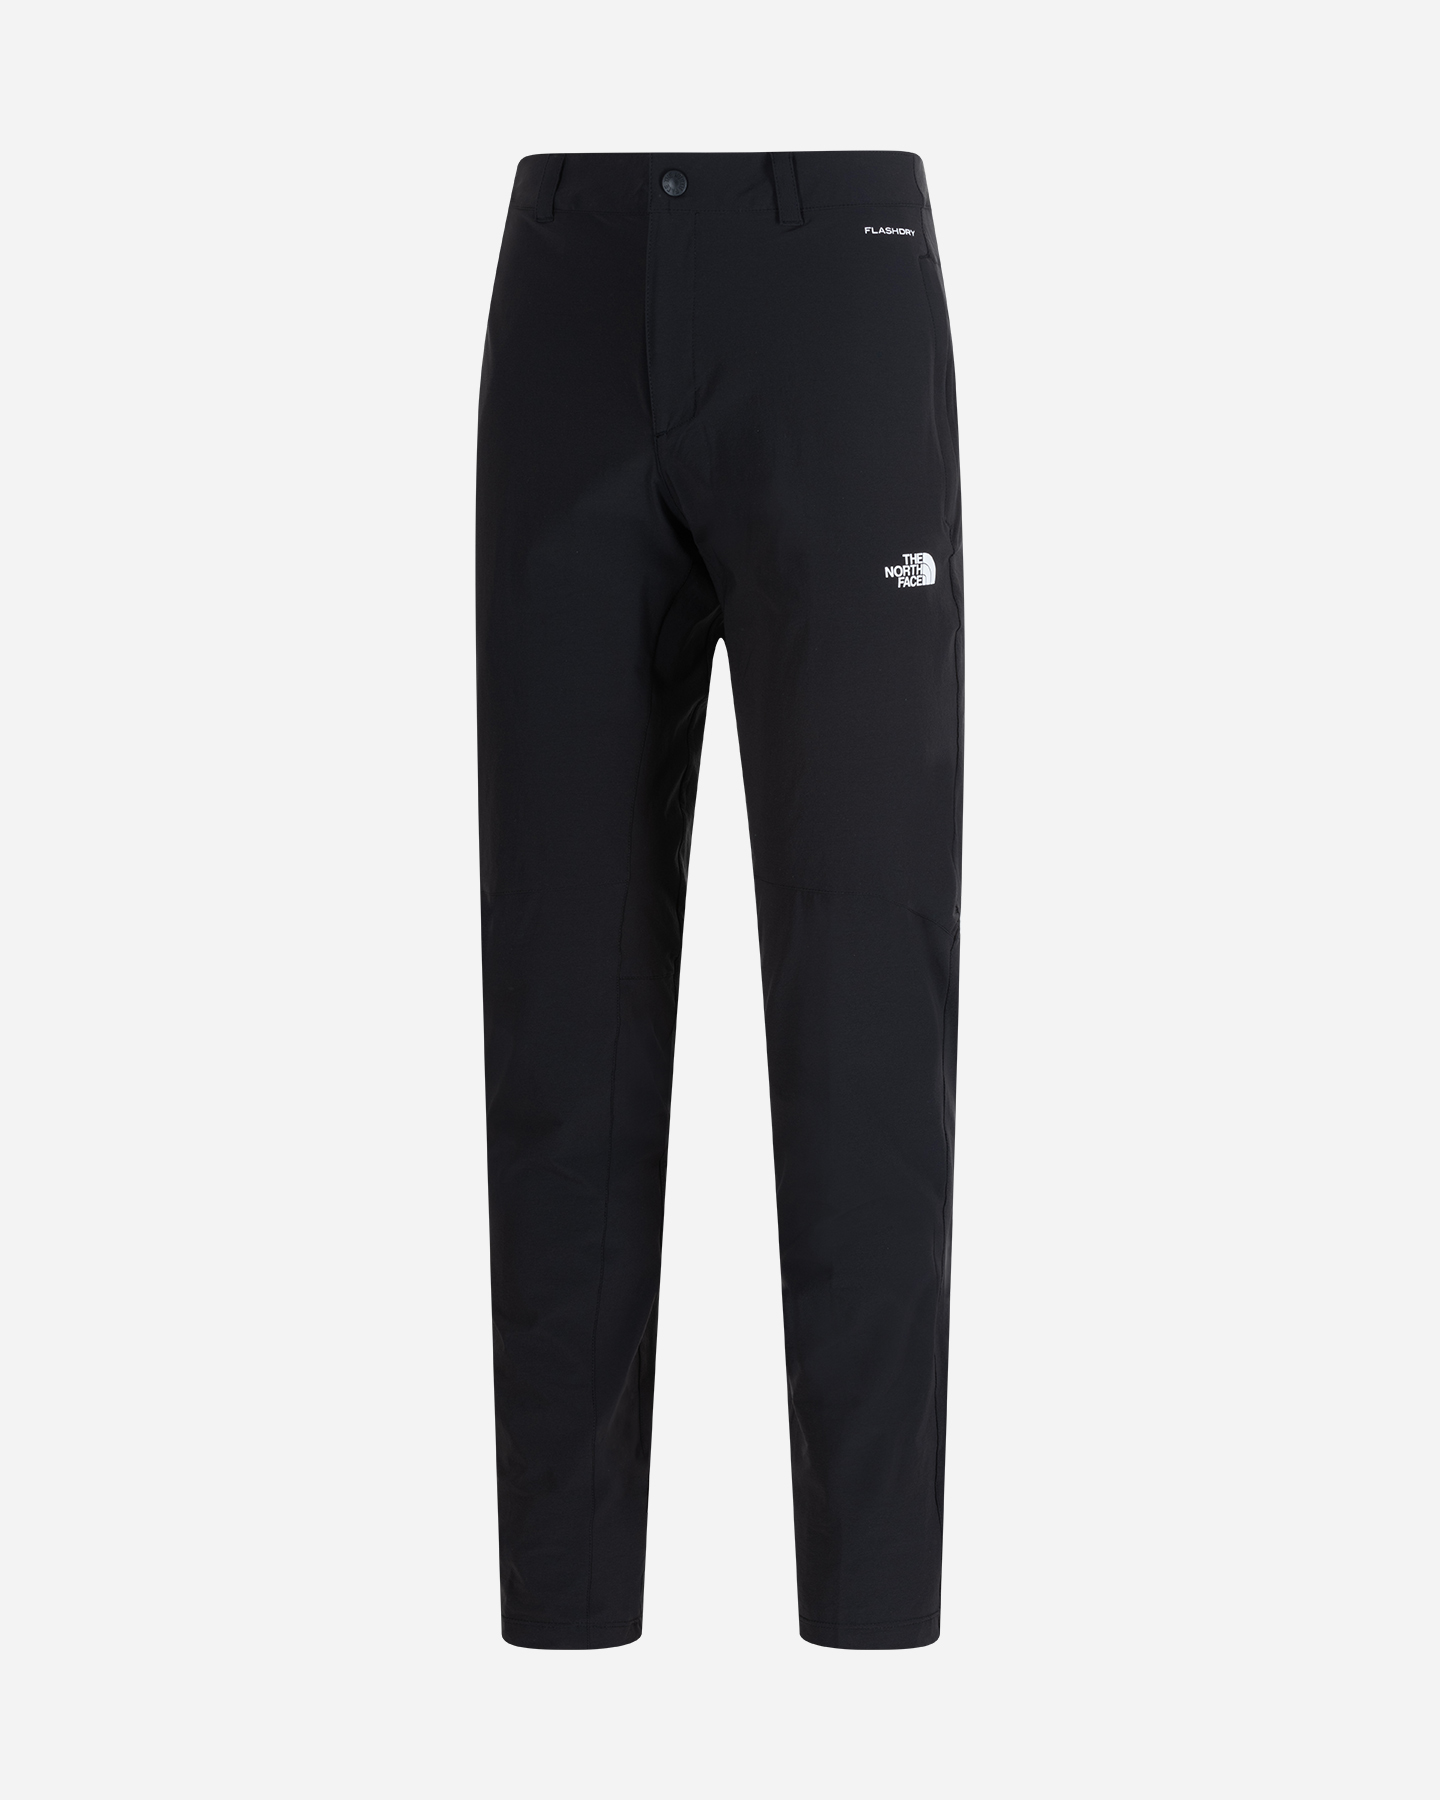 Image of The North Face Extent Iii M - Pantaloni Outdoor - Uomo